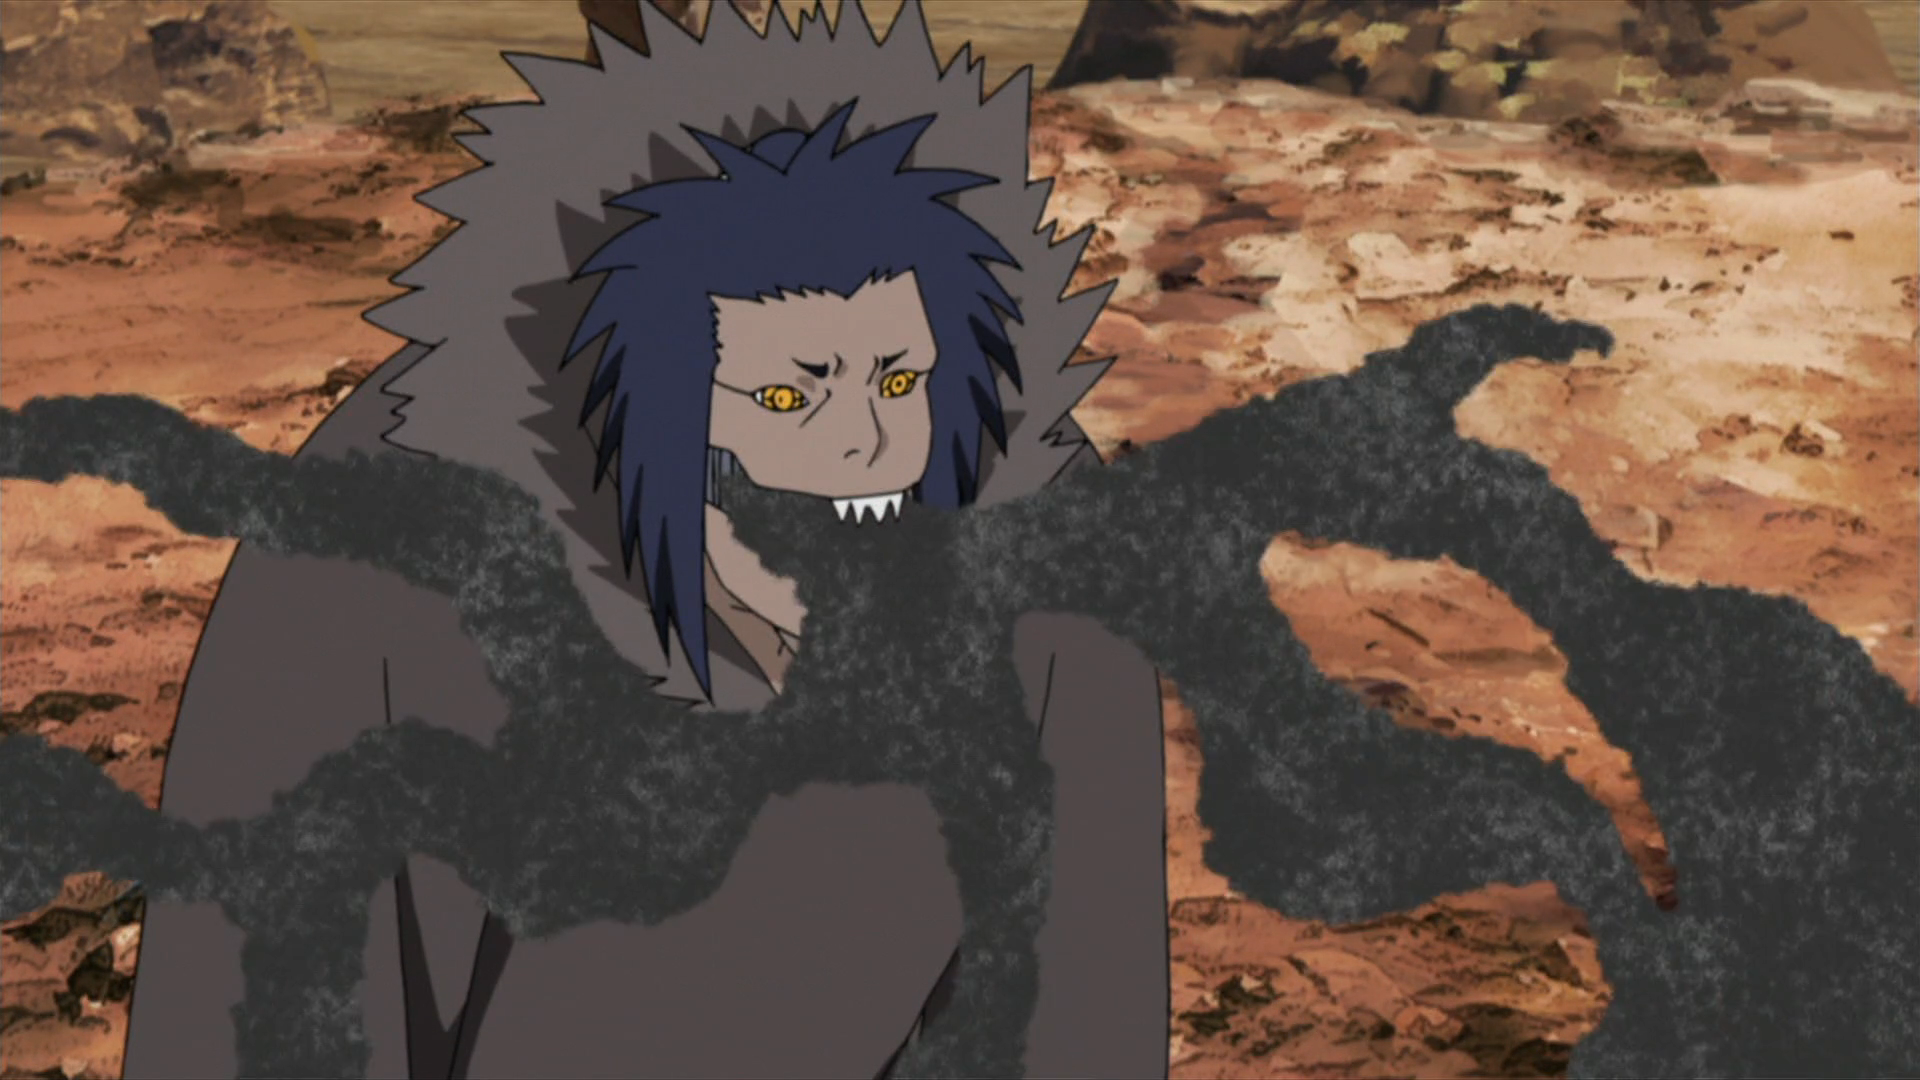 what are the names of the naruto shippuden puppets